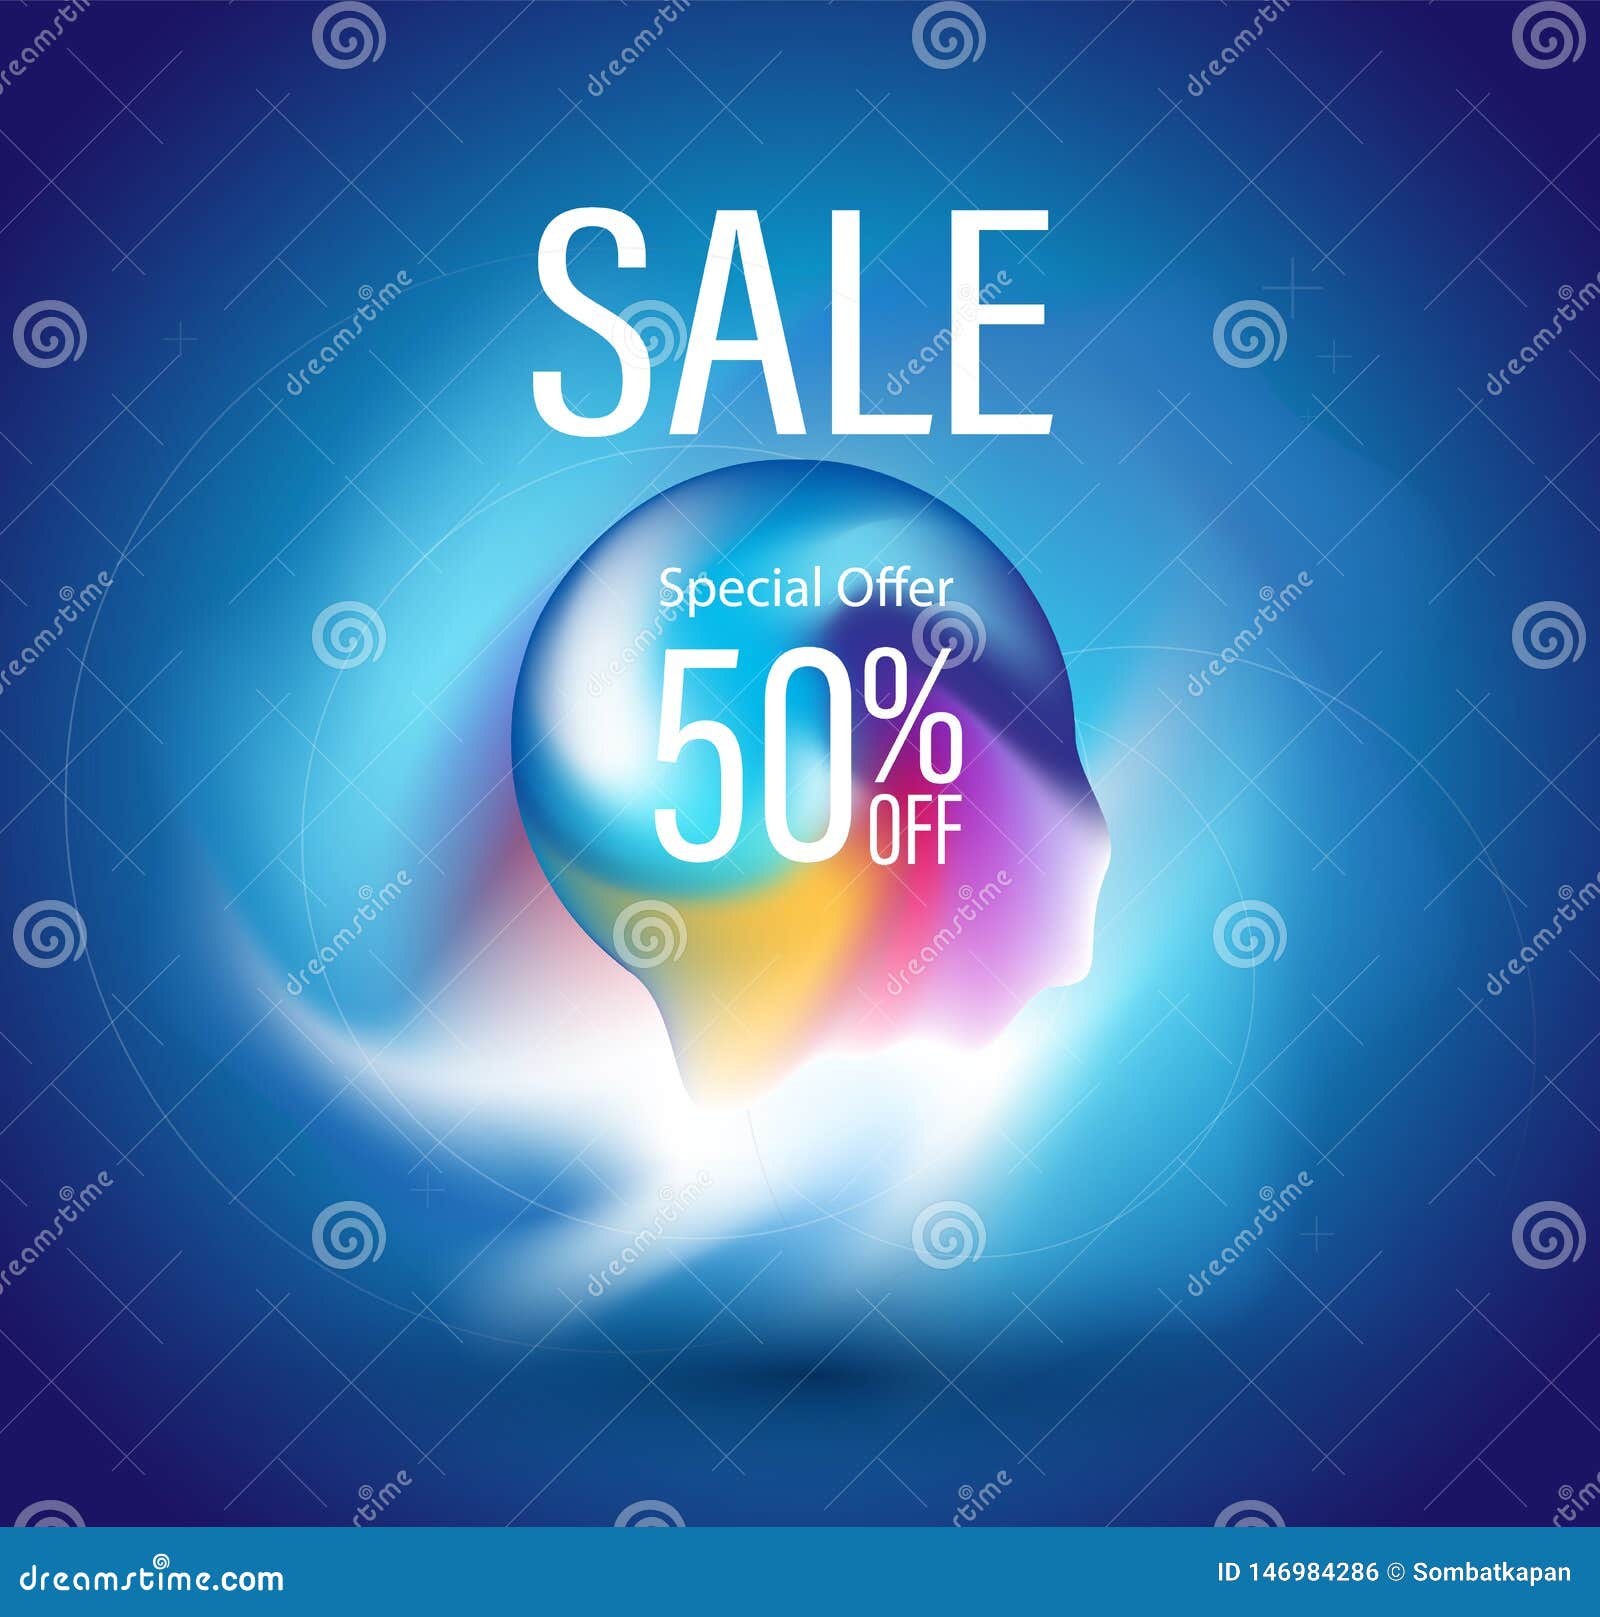 sale abstract background